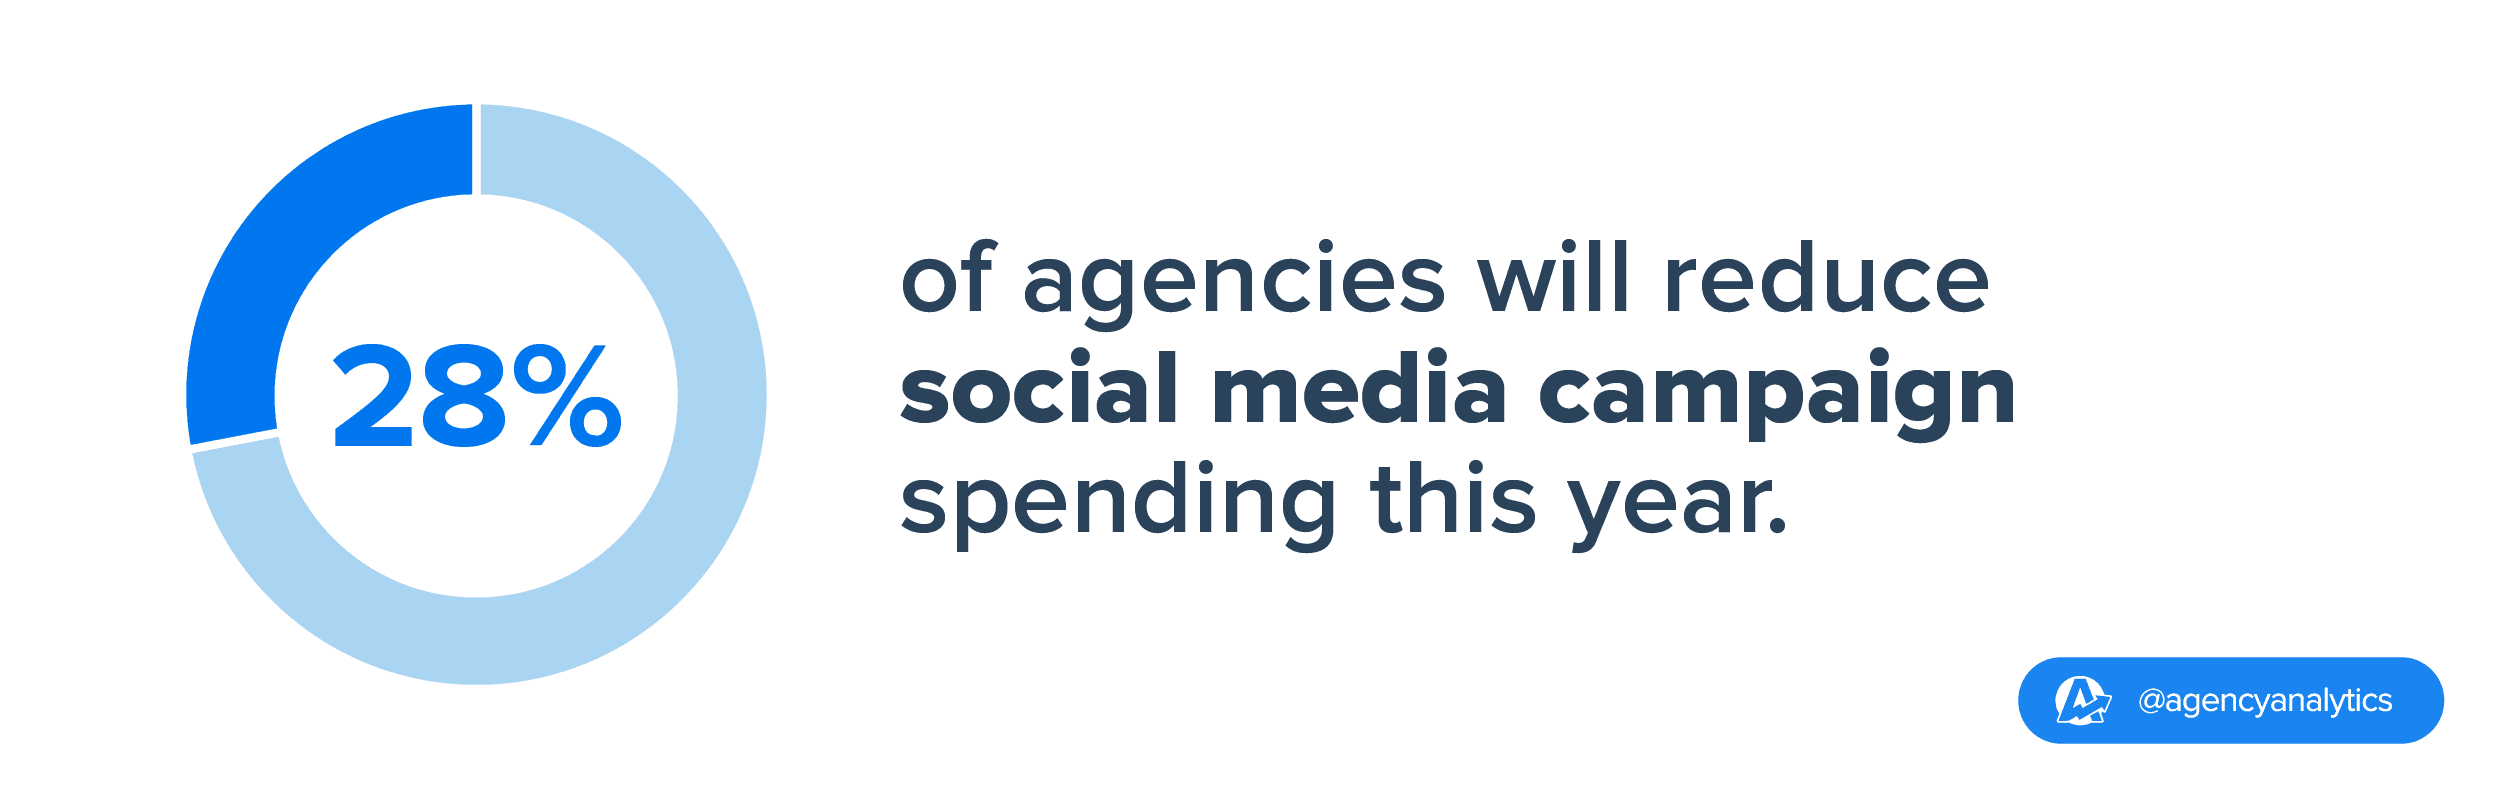 28% of agencies are opting for budget cuts in social media advertising